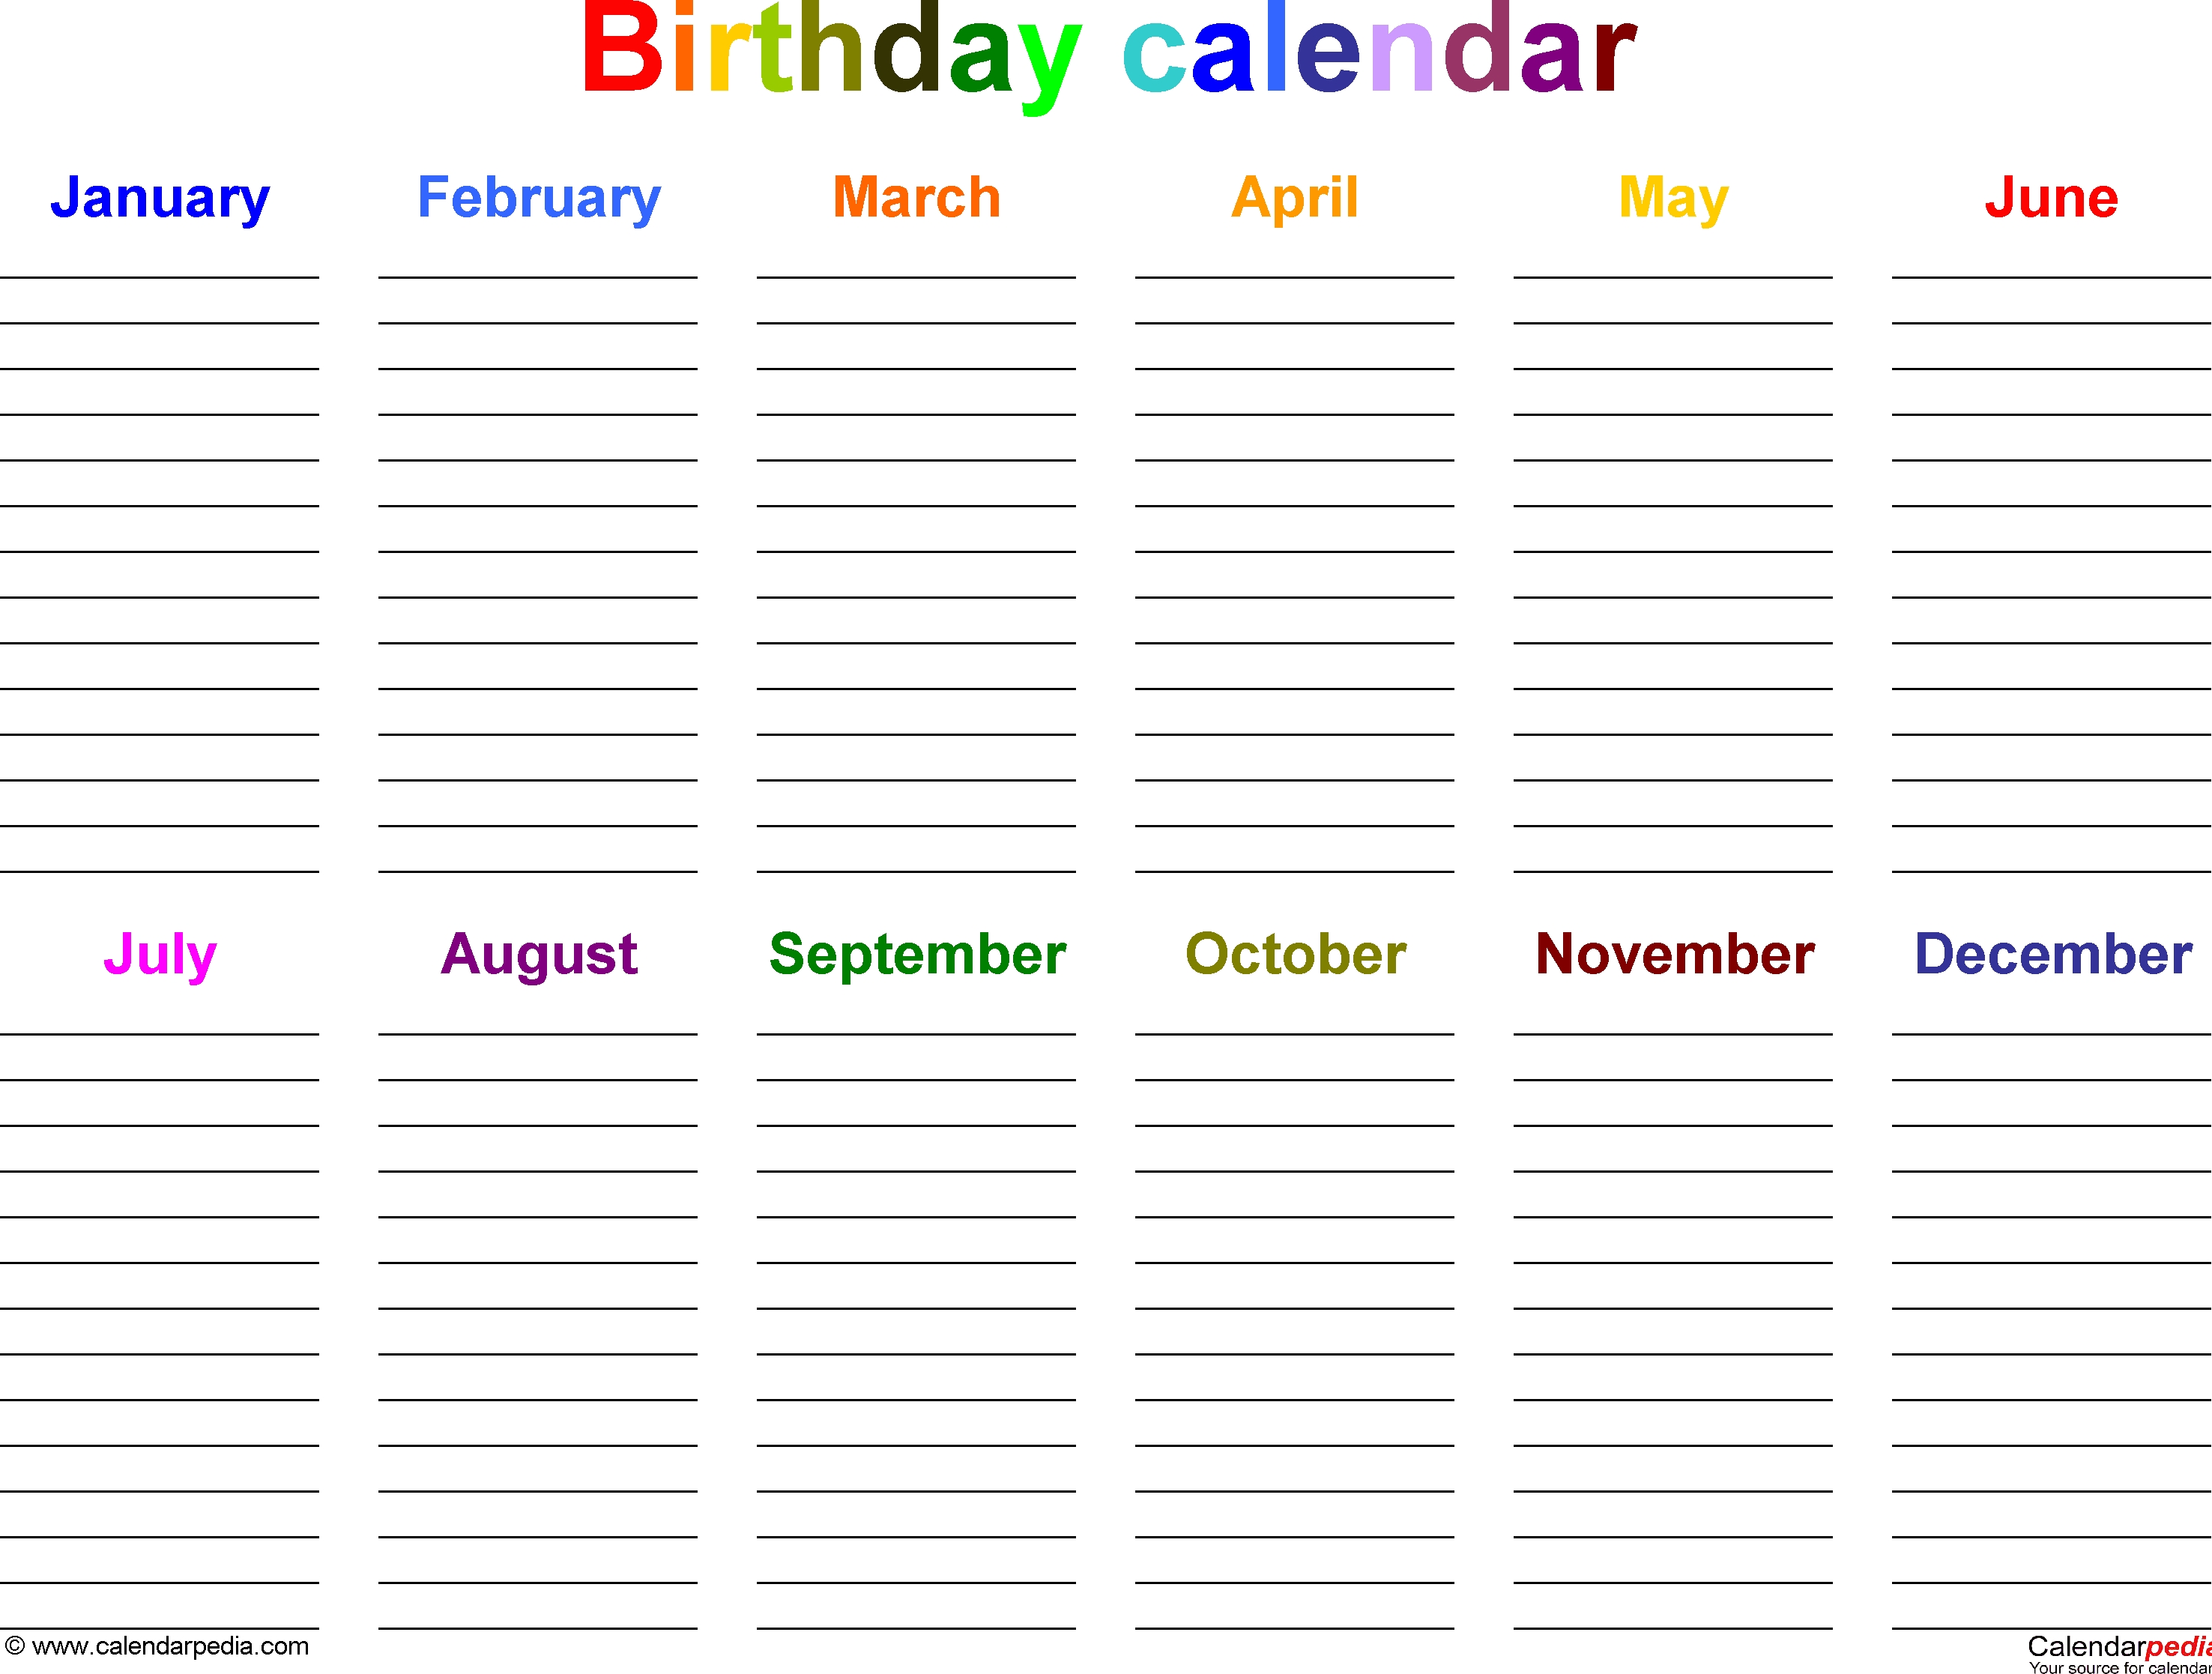 Birthday Calendars - 7 Free Printable Word Templates with regard to Free Images Of Birthday Calanders